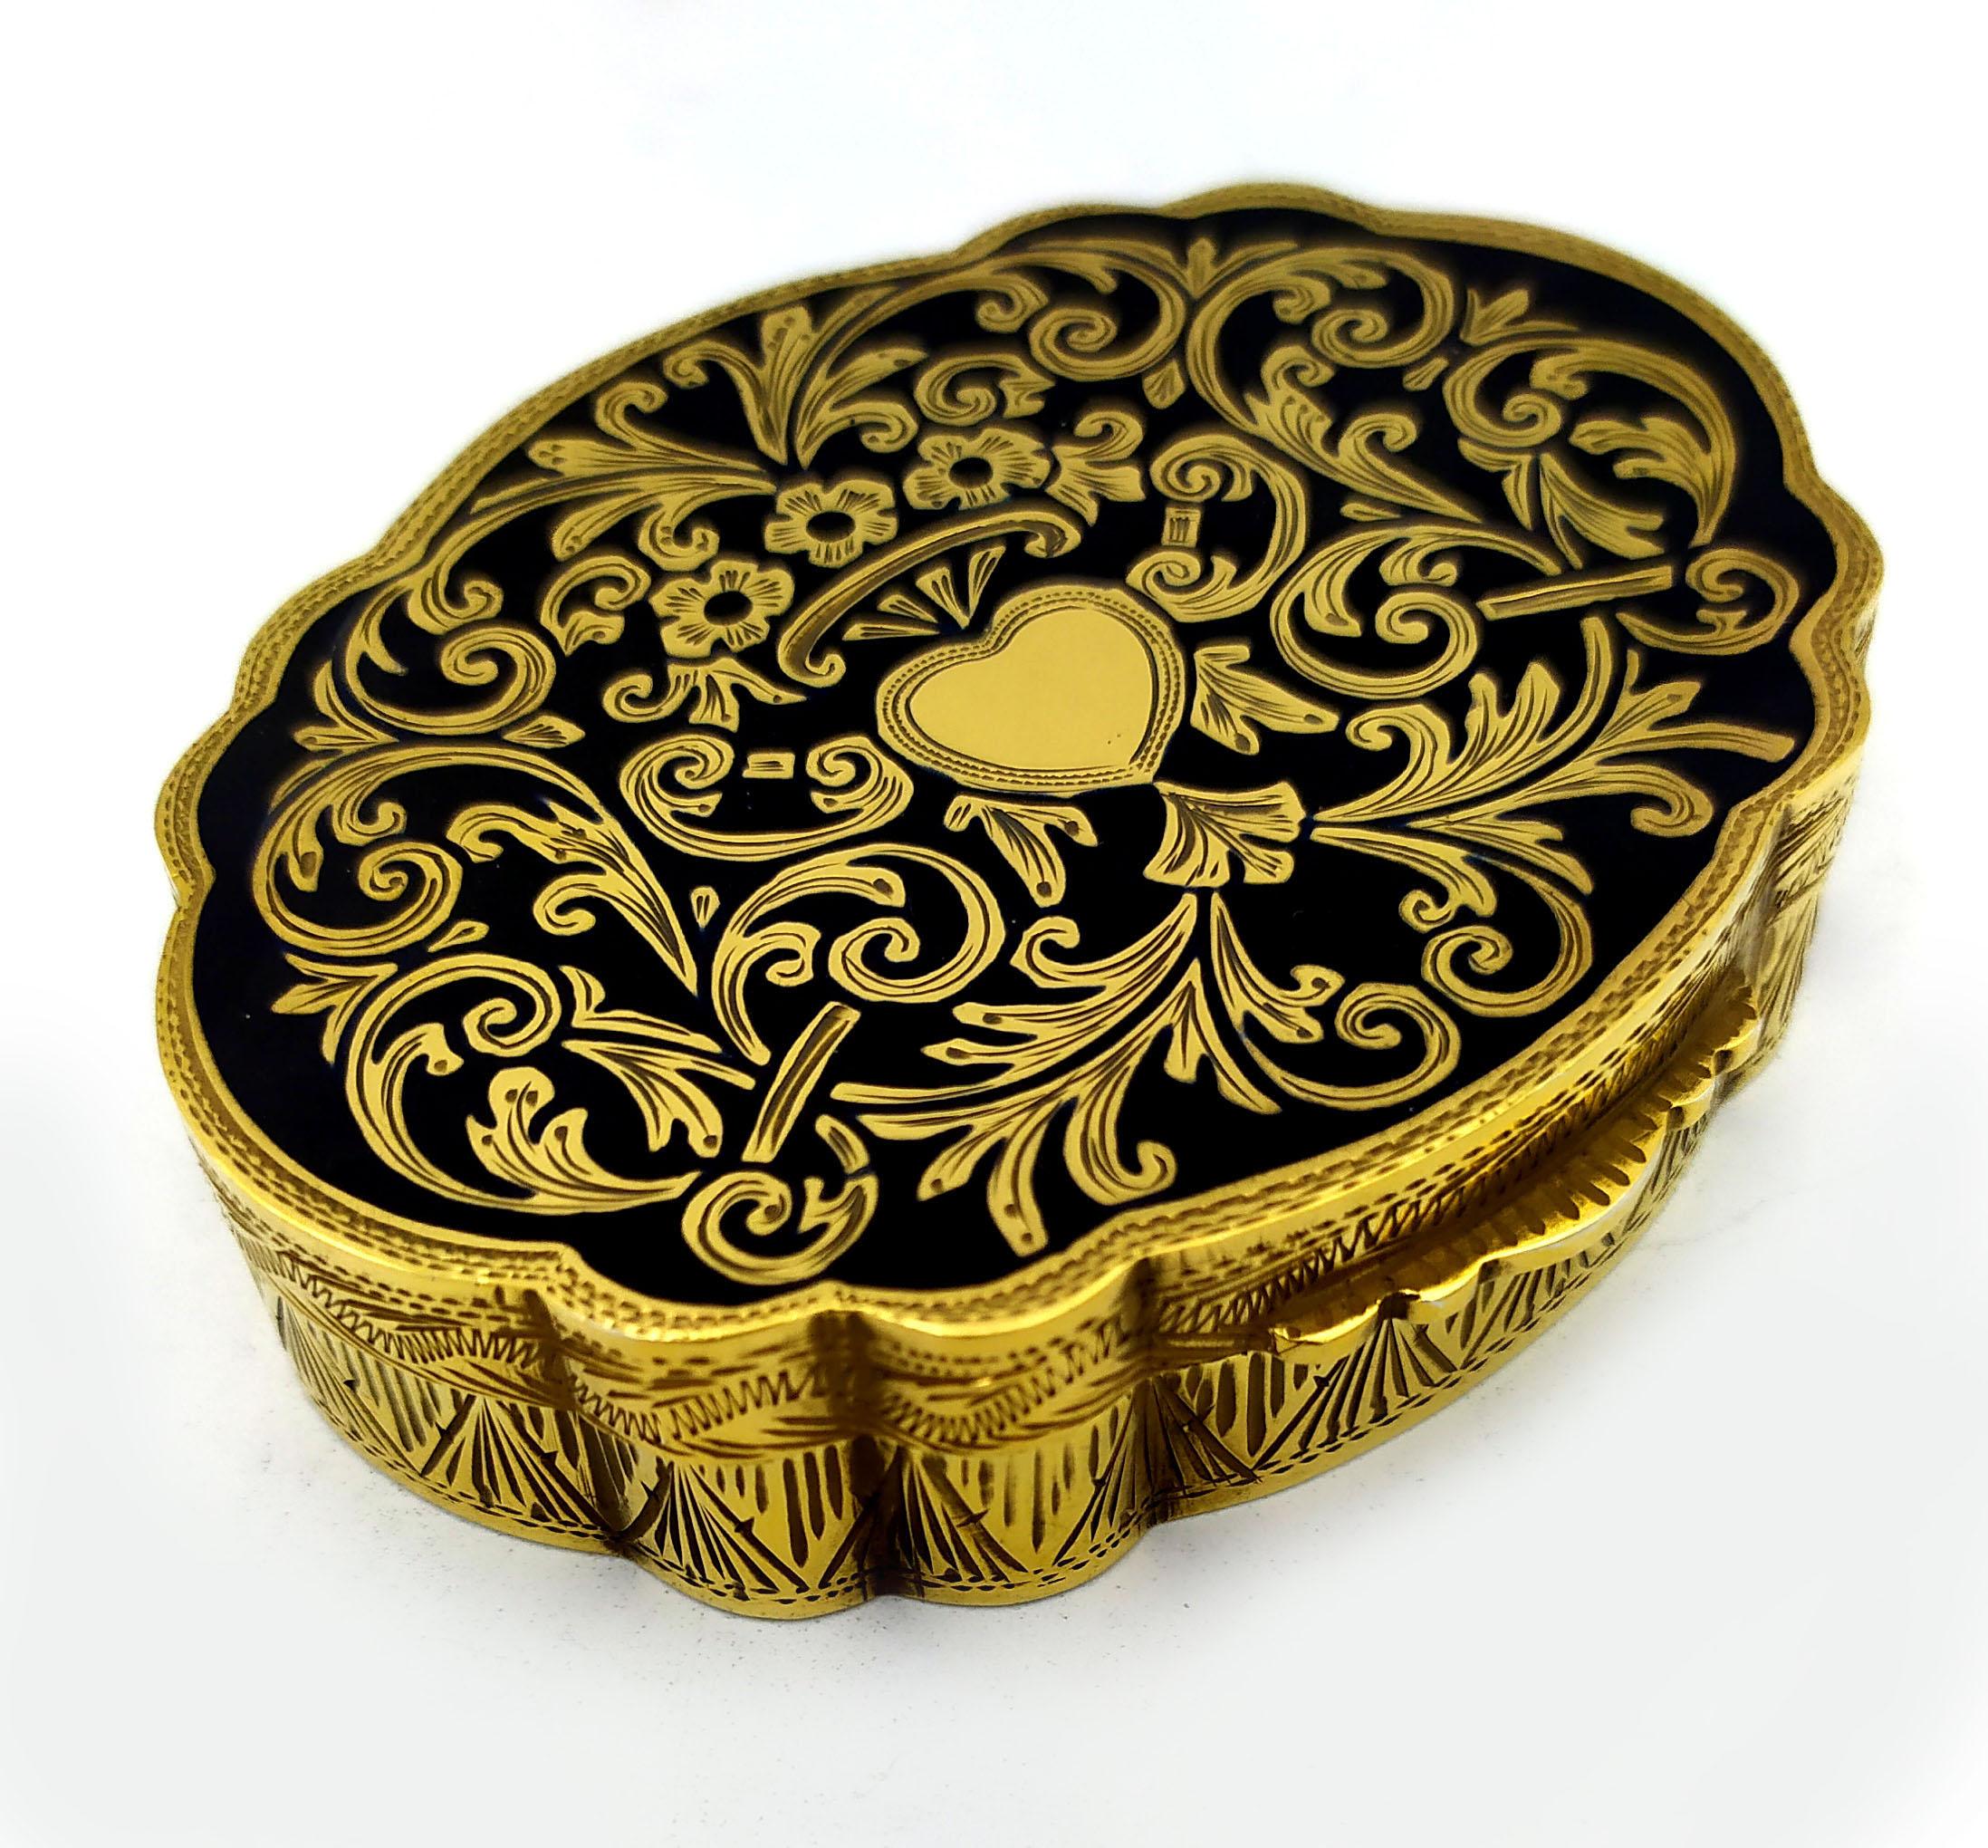 Shaped table snuff box in 925/1000 sterling silver gold plated with fine fire-enamelled baroque style engraving. Very fine hand engraving on all surfaces. Dimensions cm. 6.2 x 7.8 cm high. 1.8. Weight gr. 121. Designed by Franco Salimbeni in 1972